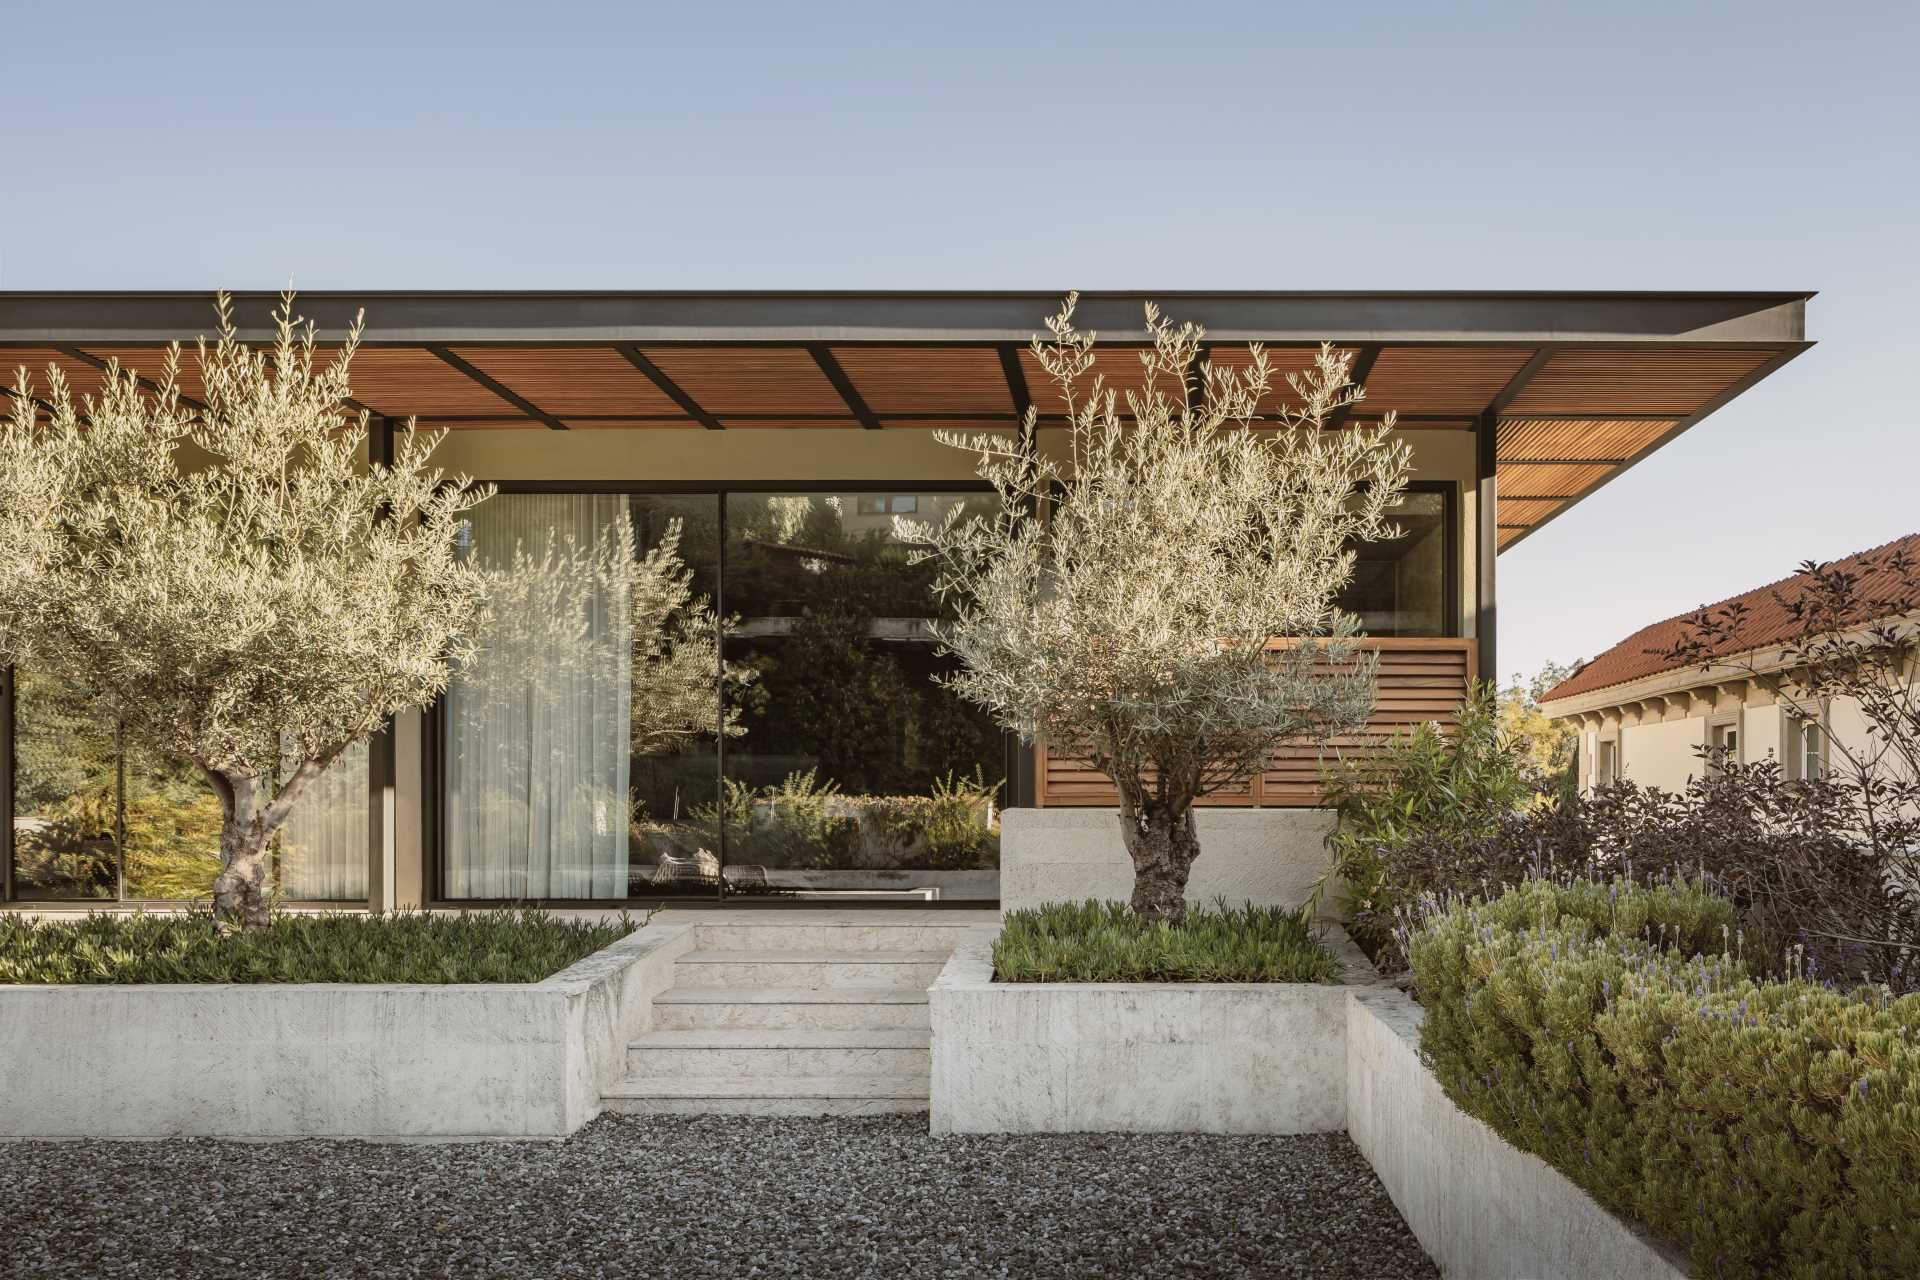 The exterior of this modern house features concrete, wood, and metal, as well as landscaped pathways and gardens.